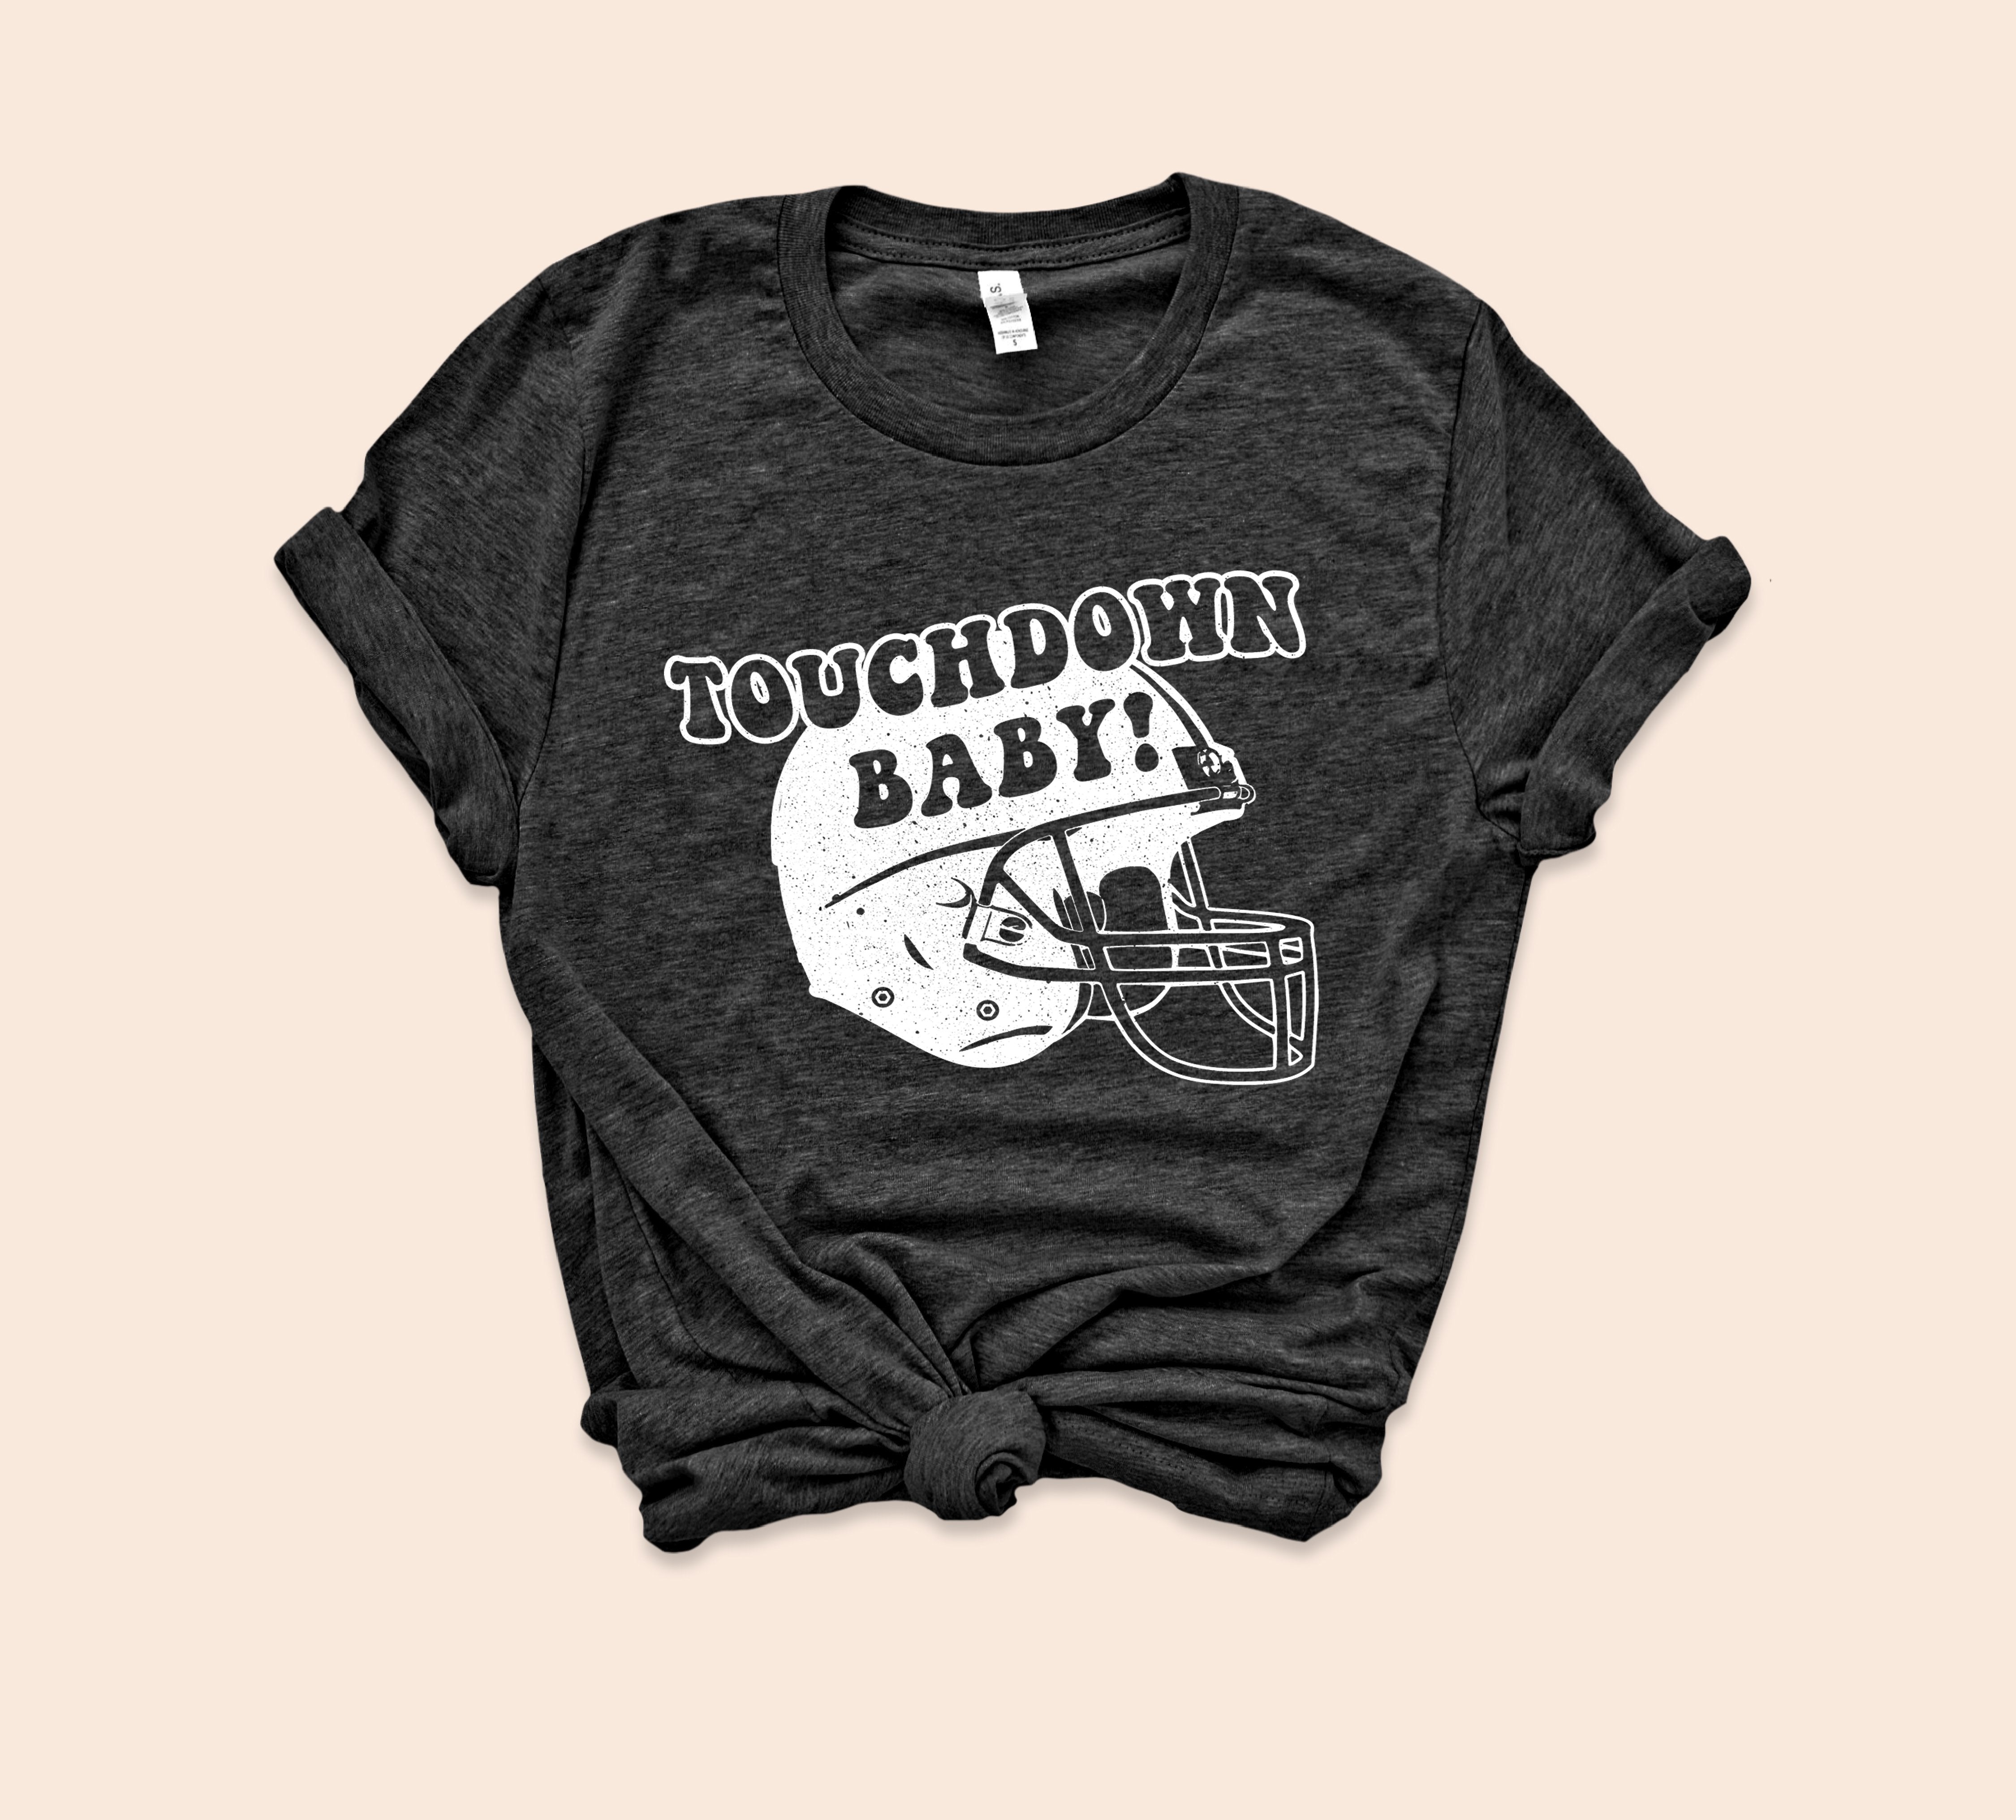 Heather black shirt with football helmet that says touchdown baby - HighCiti